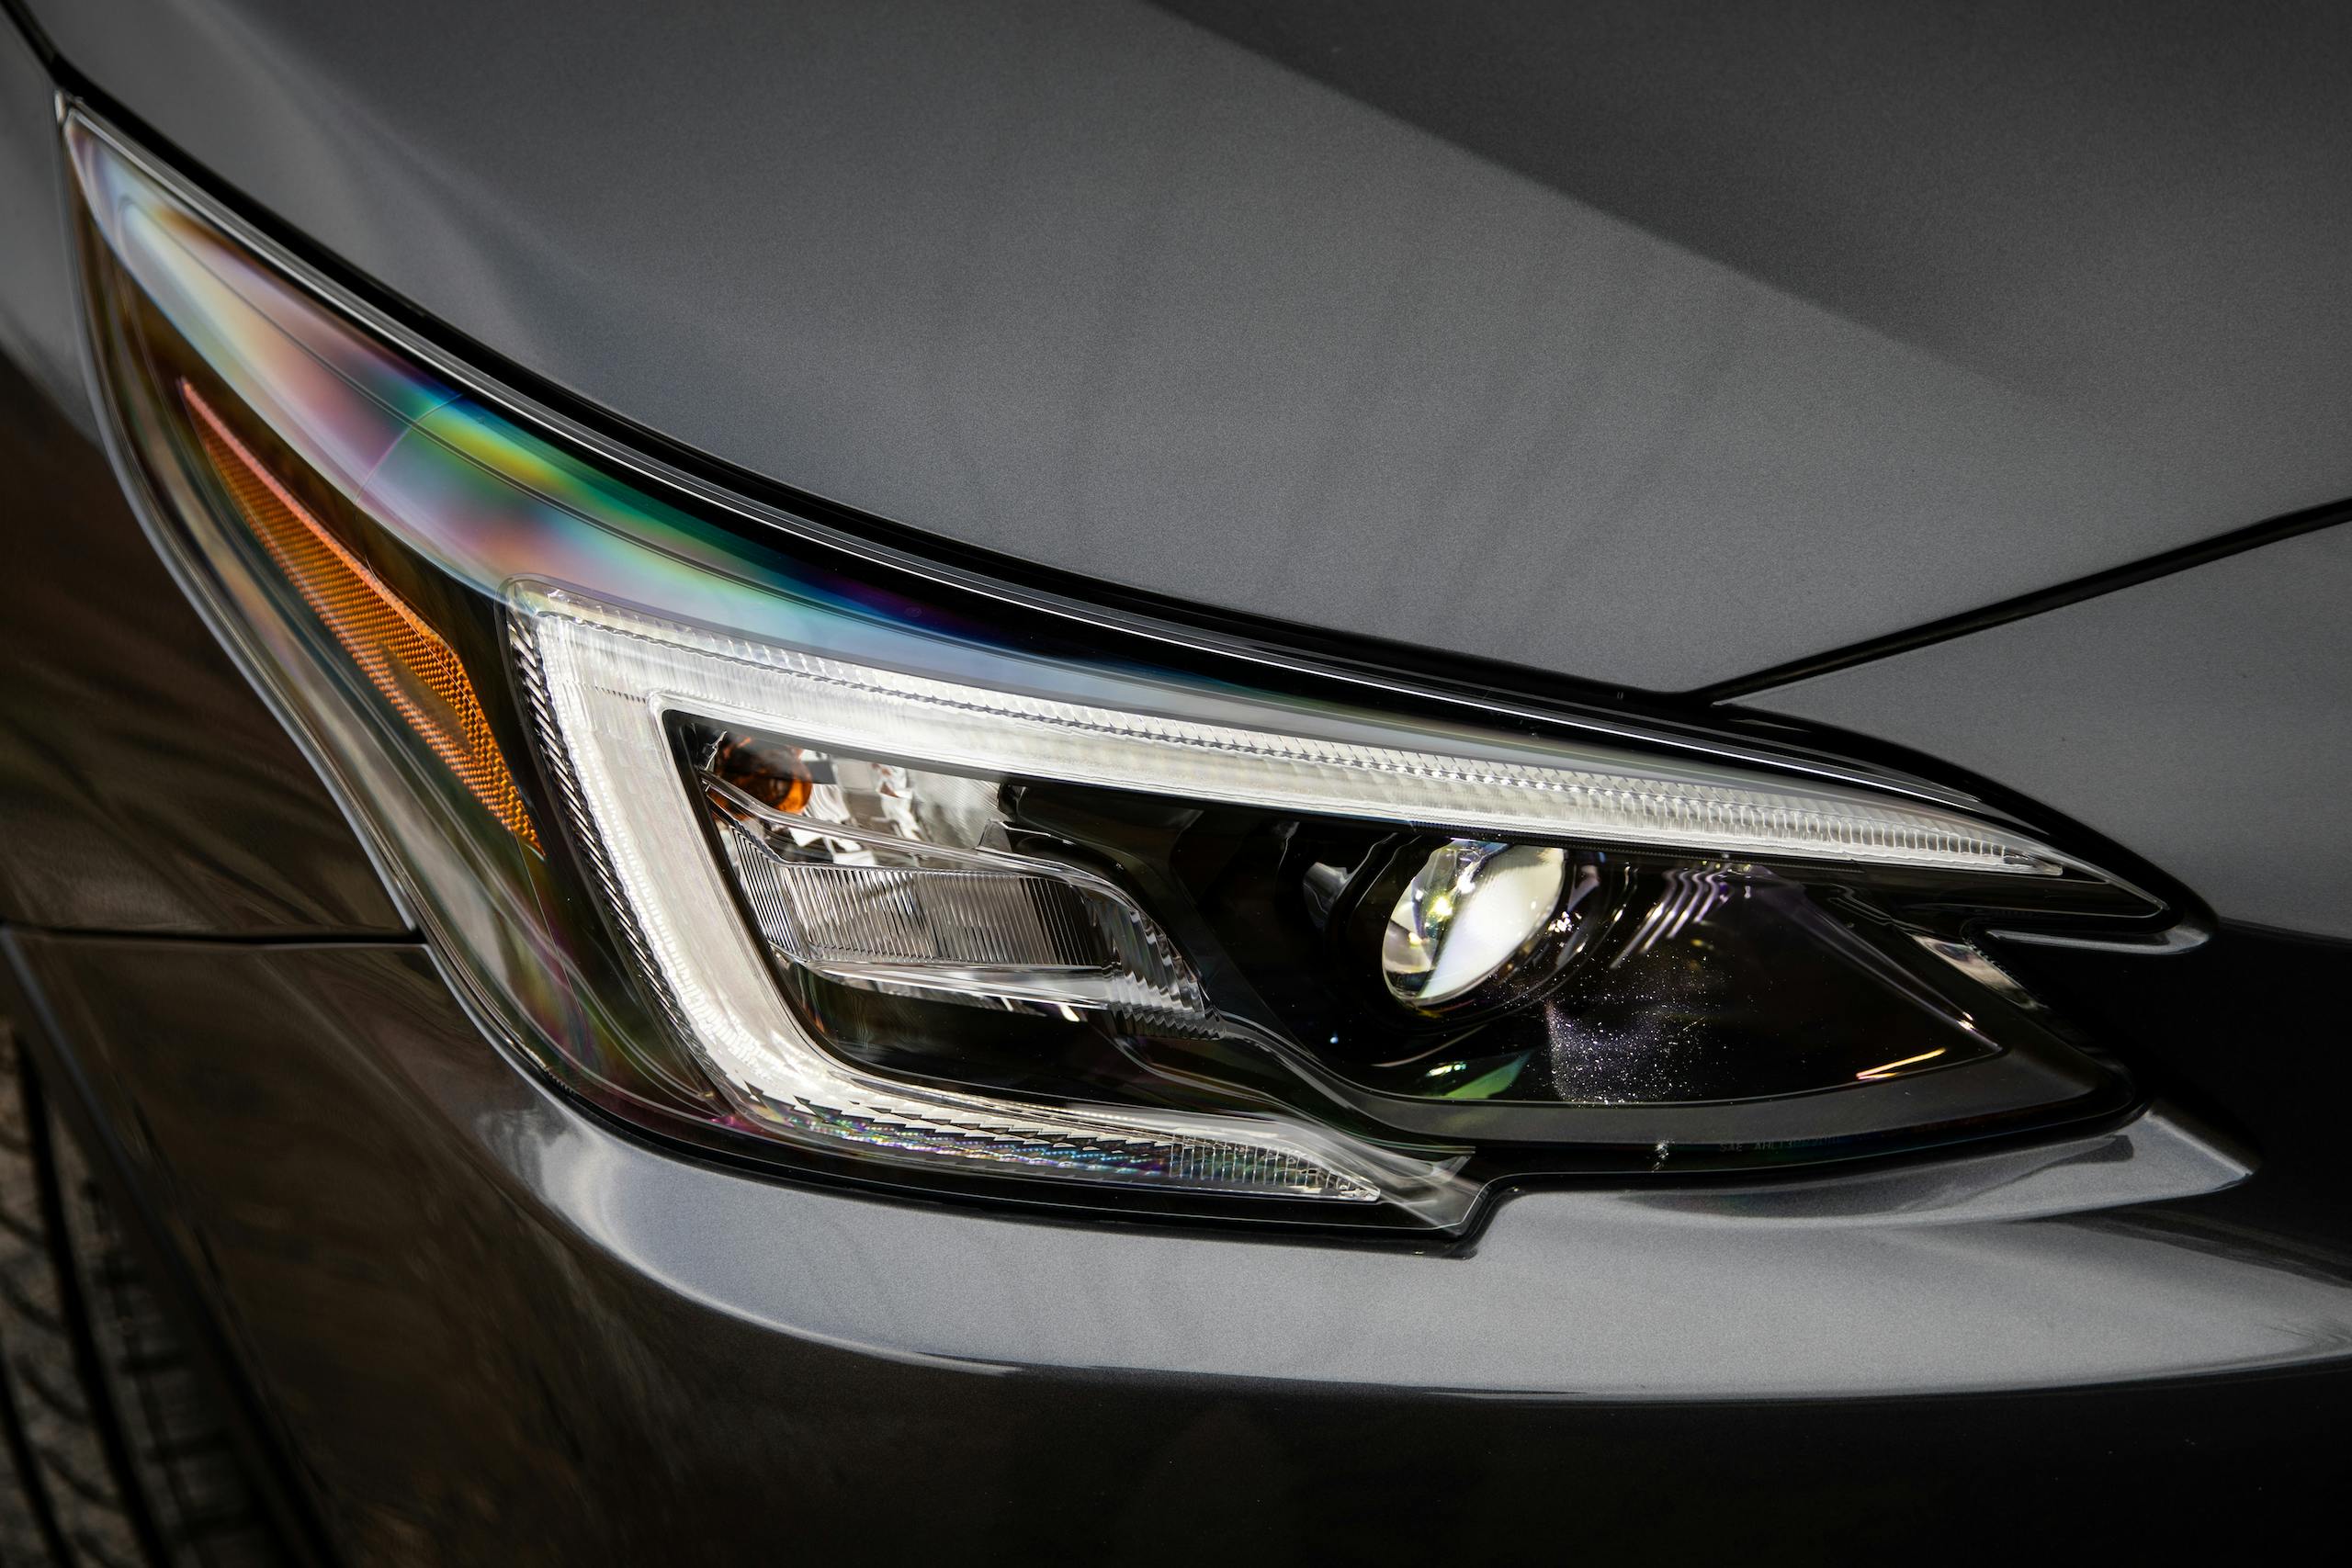 Subaru Outback front headlight detail